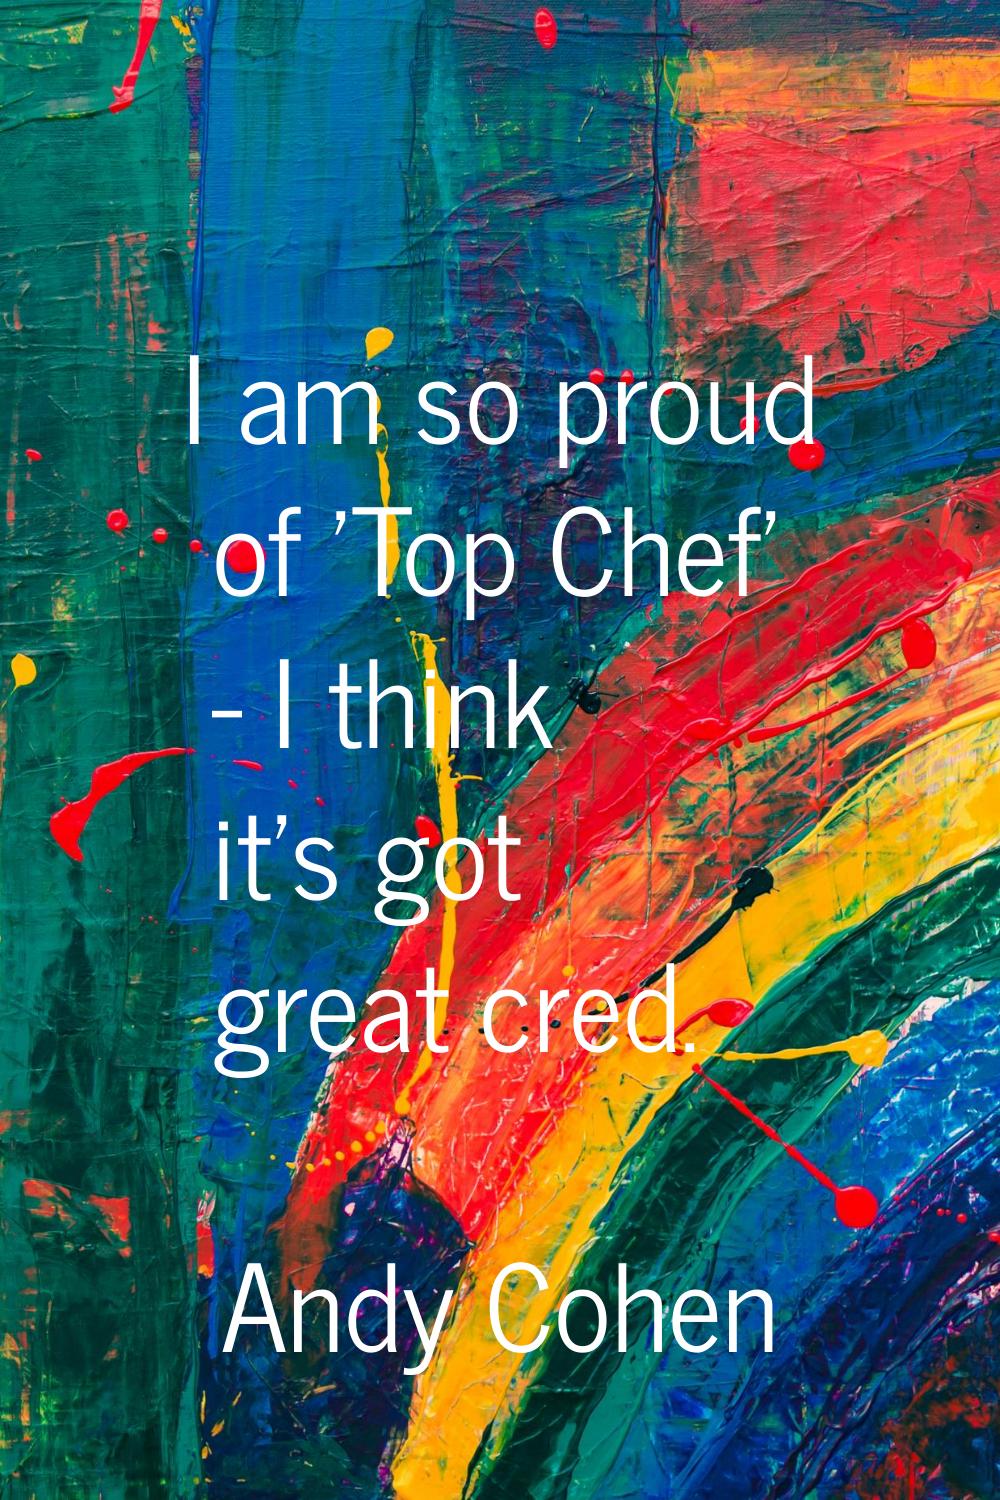 I am so proud of 'Top Chef' - I think it's got great cred.